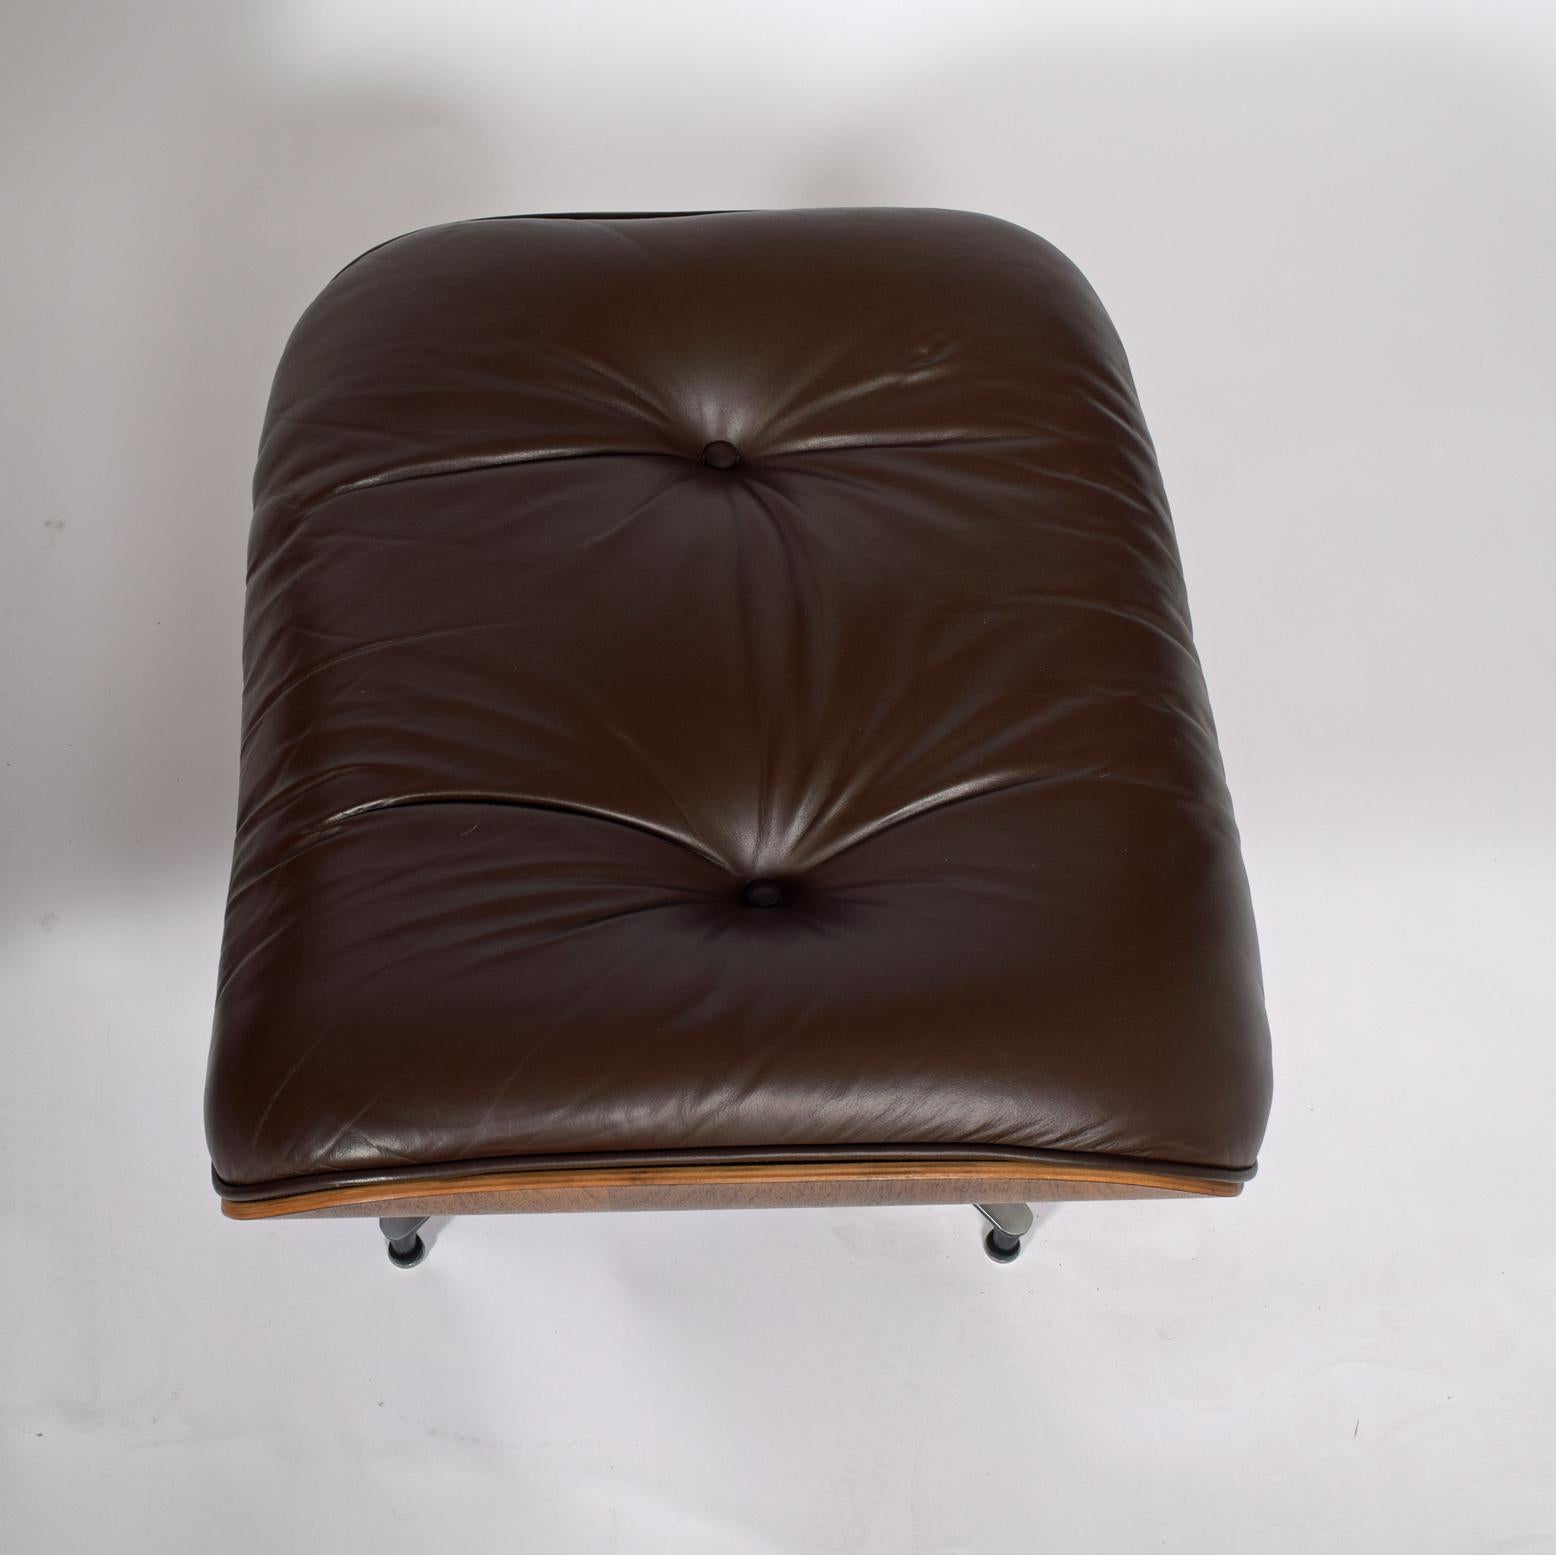 Mid-20th Century Rosewood Lounge Chair and Ottoman 670/671 by Charles Eames for Herman Miller